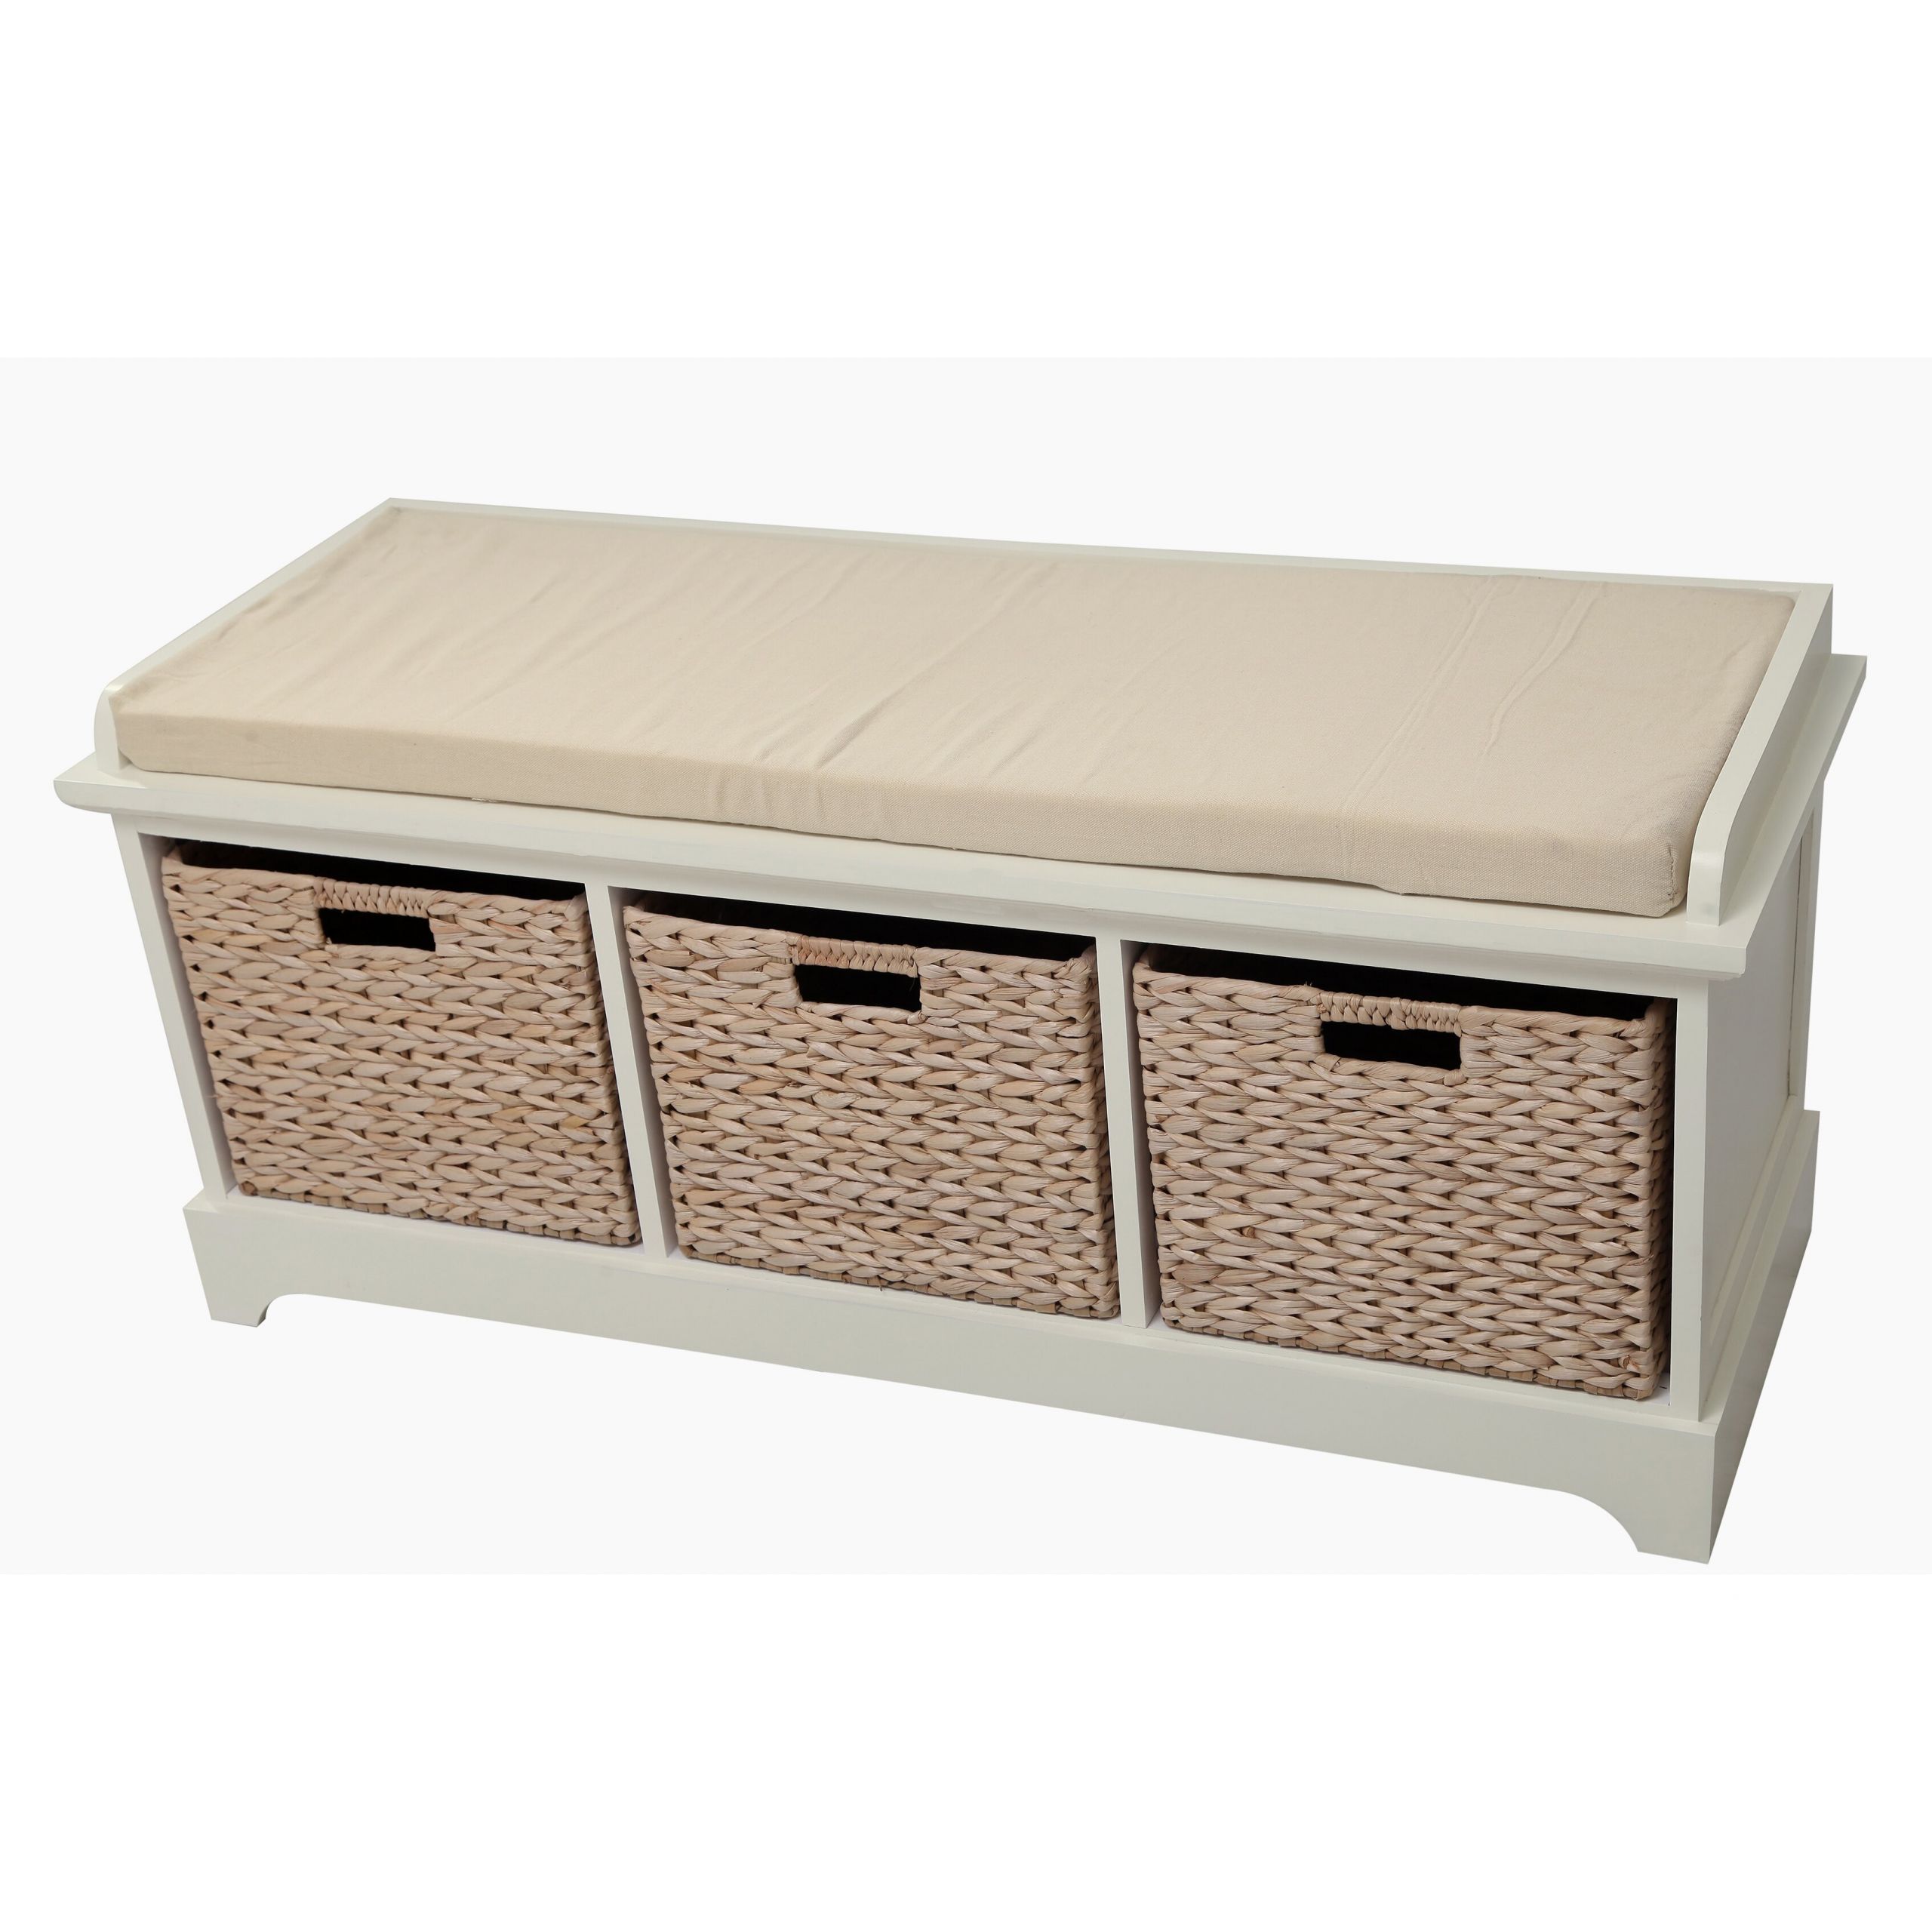 Storage Bench With Baskets
 Gallerie Decor Newport Wooden Bedroom Storage Bench with 3